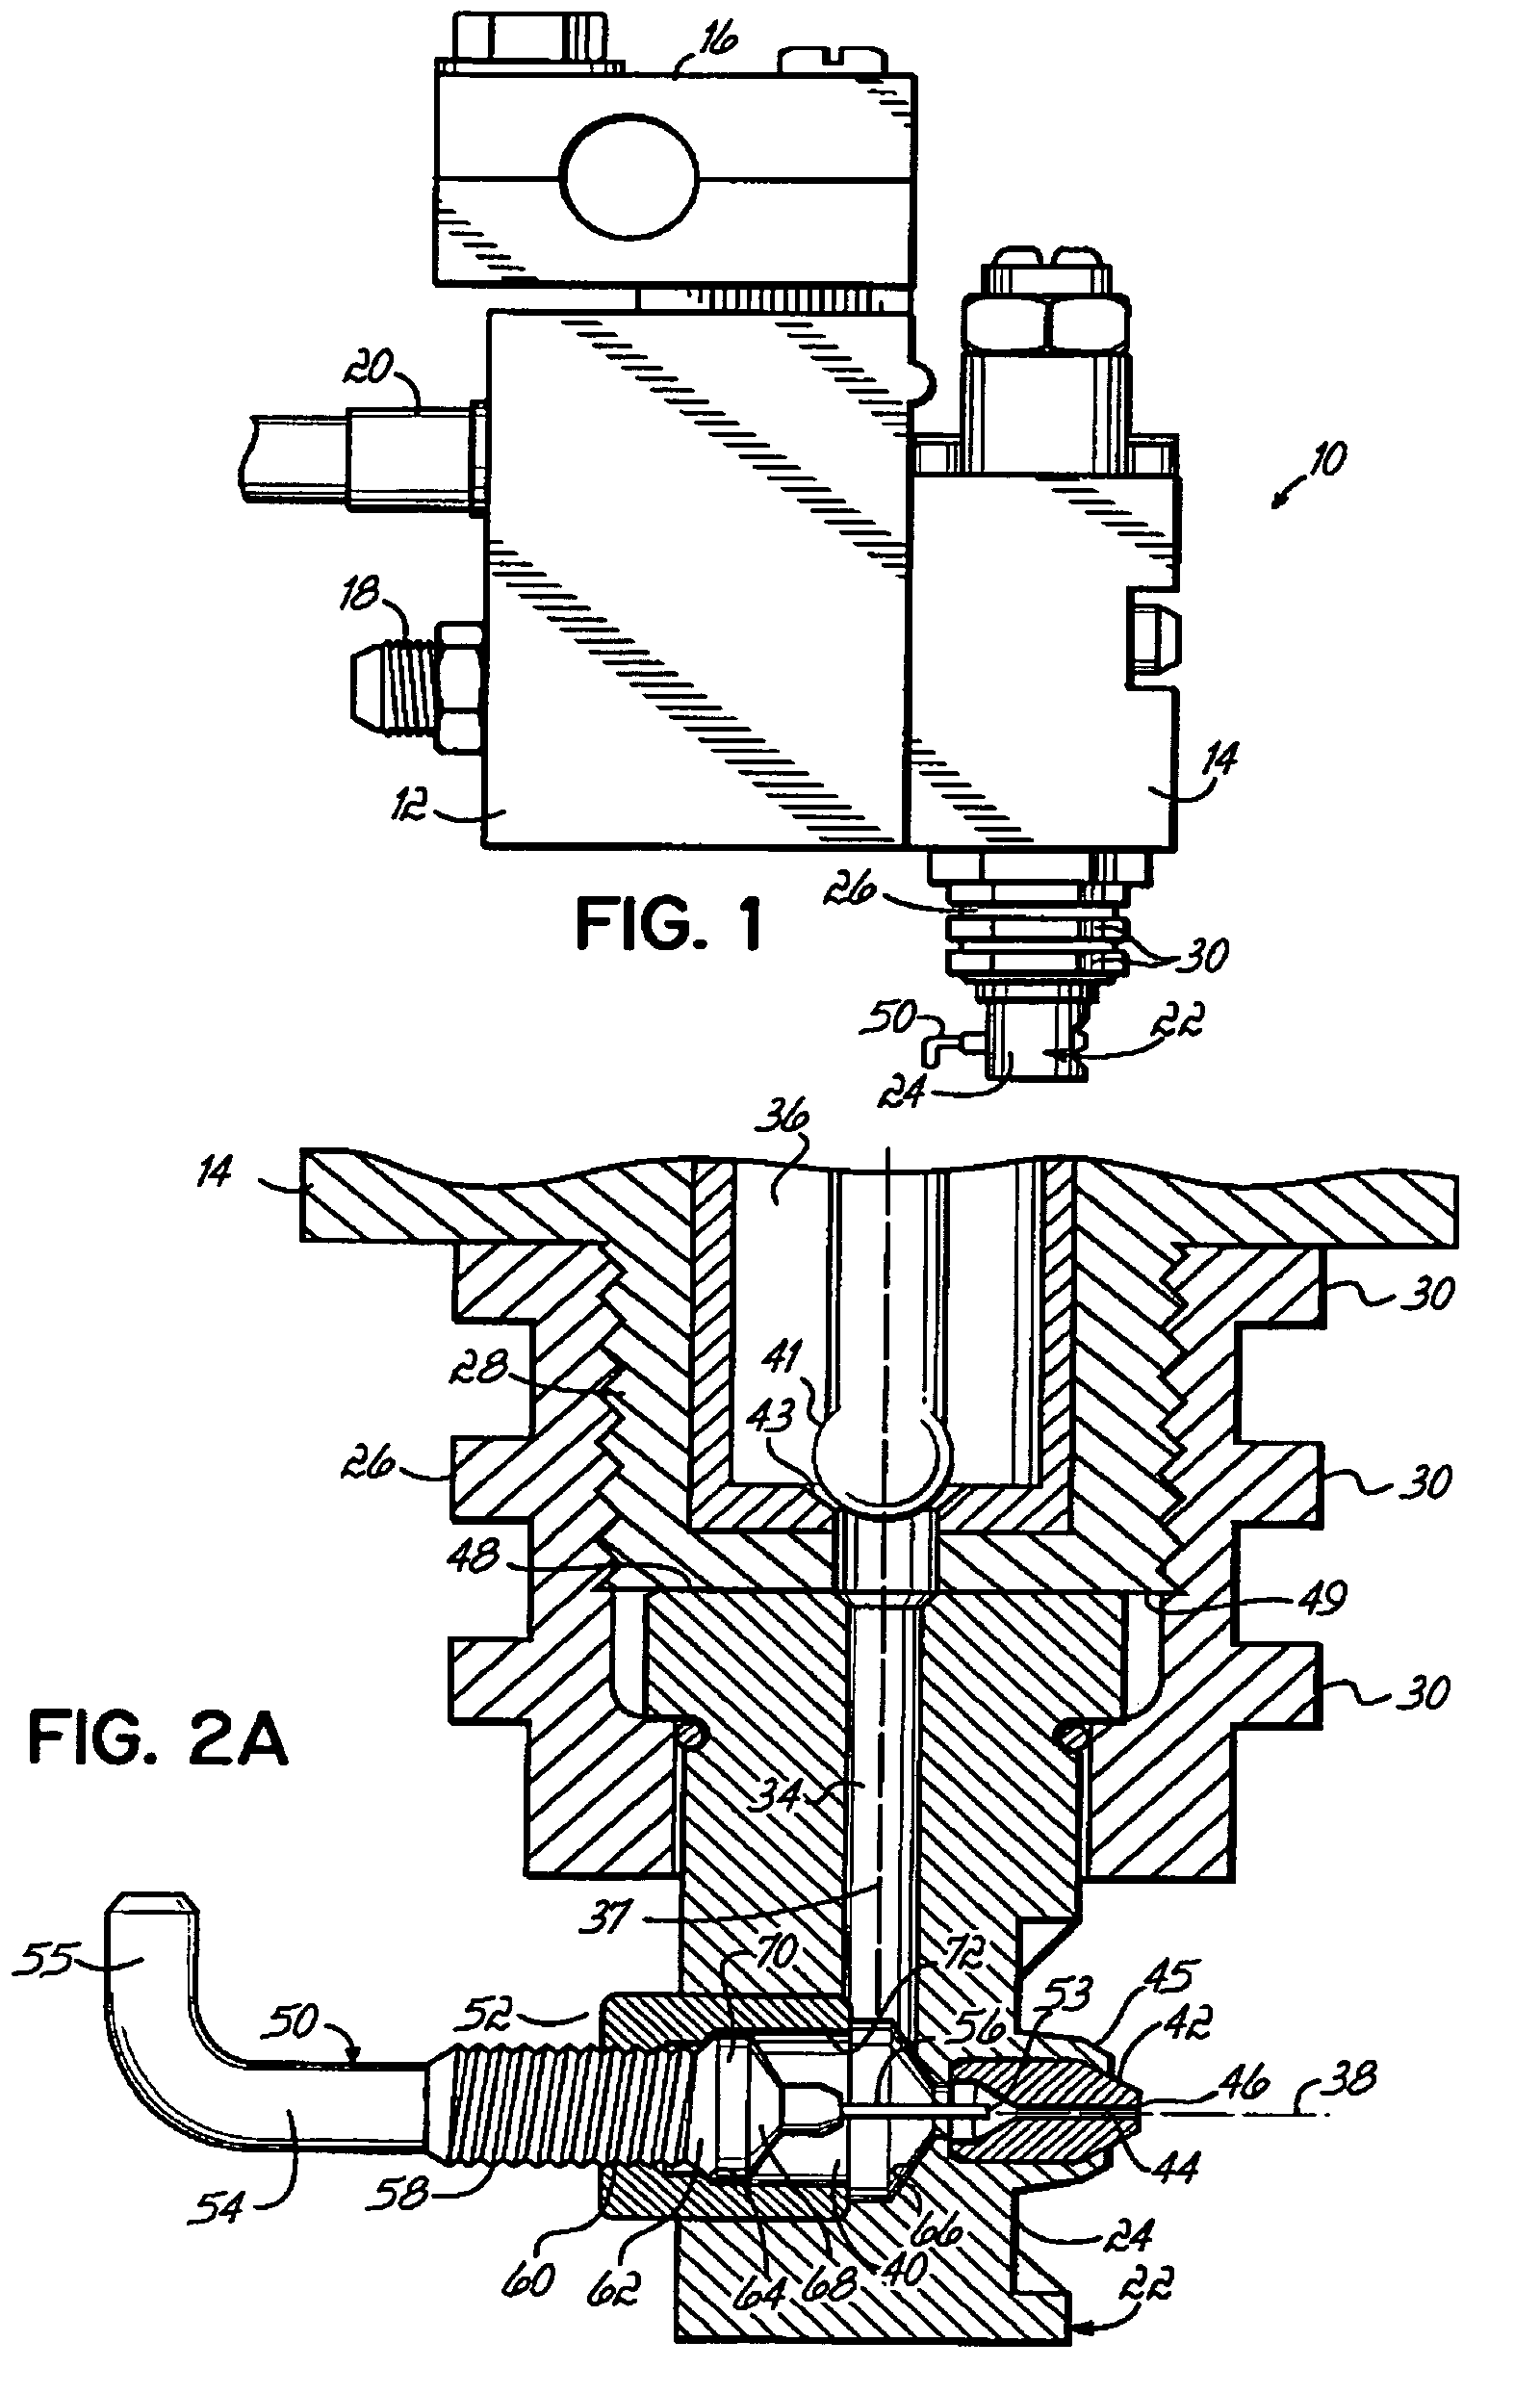 Integral nozzle cleaning system